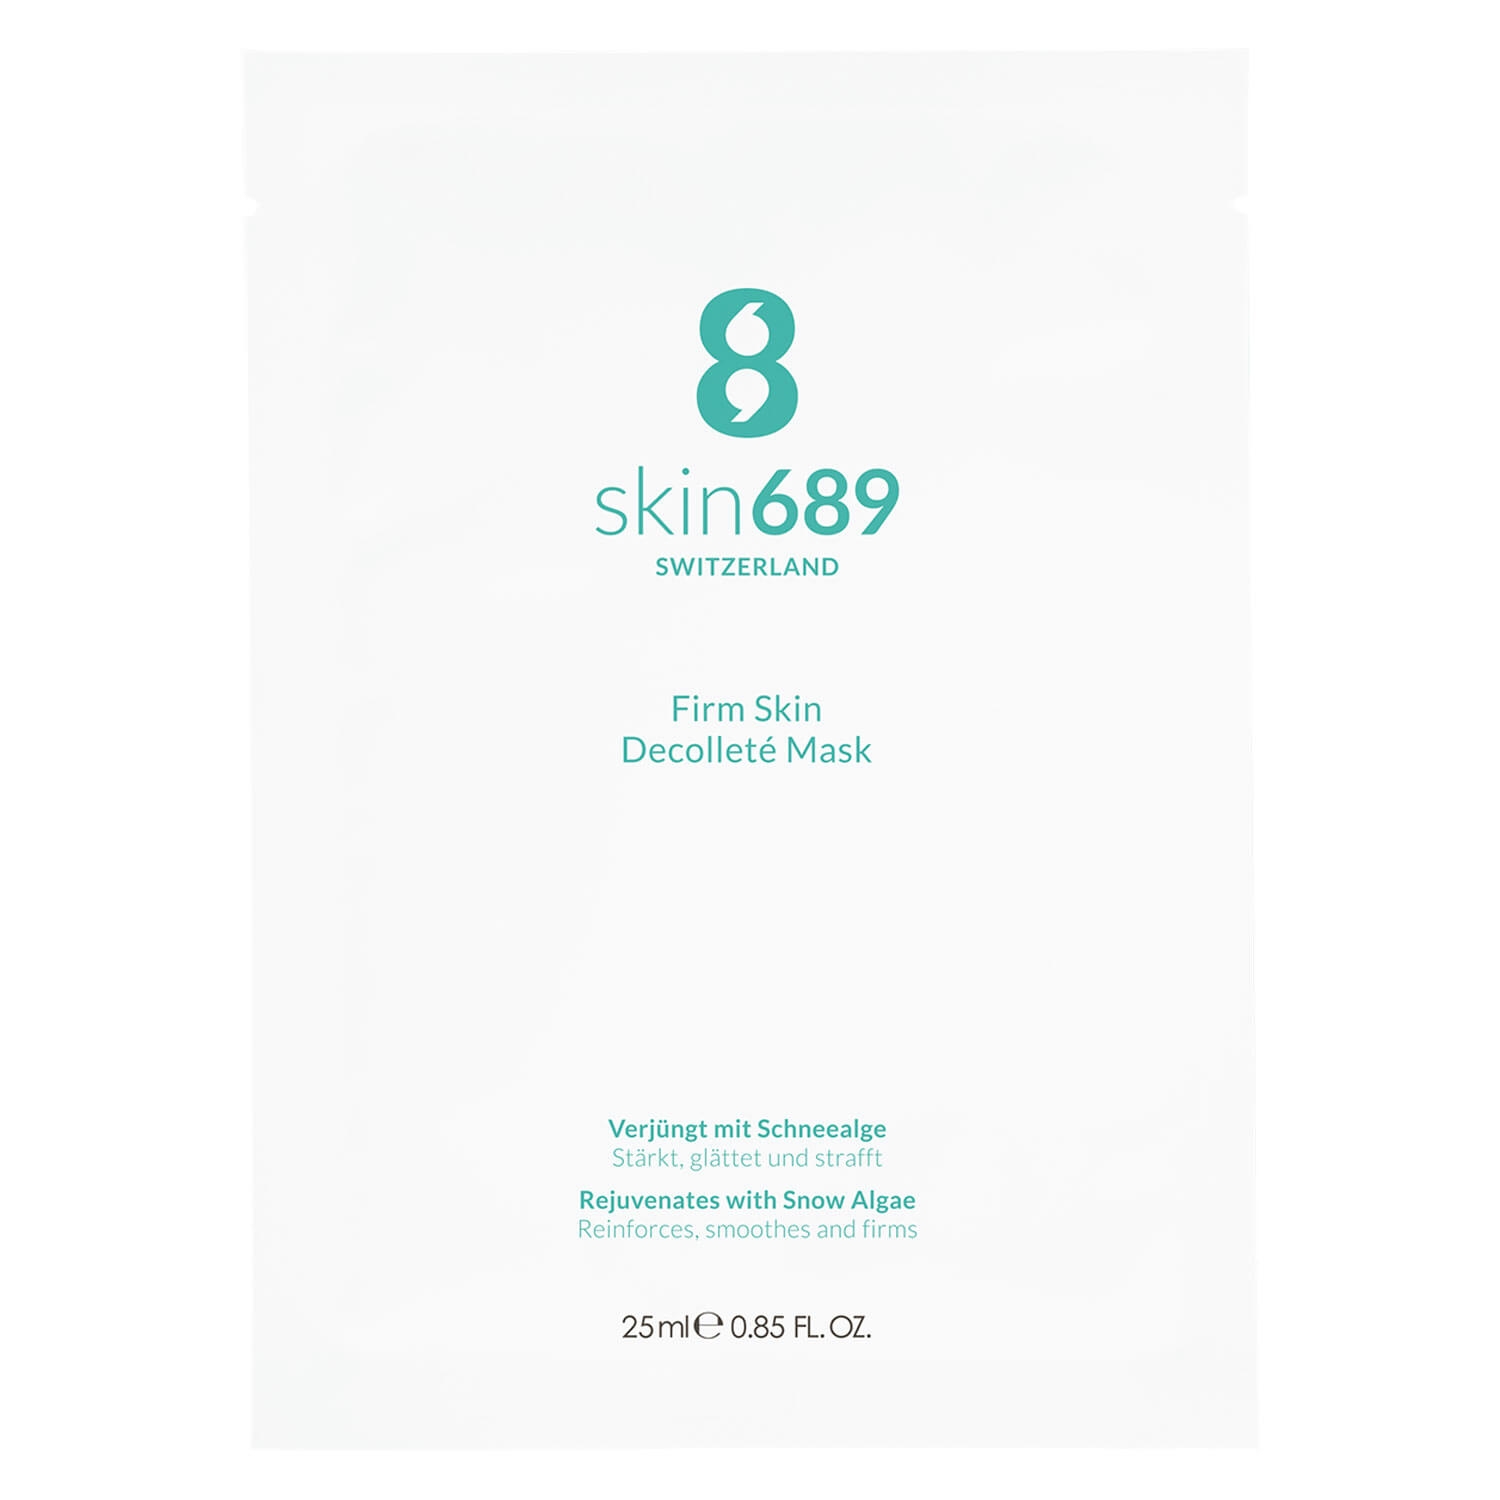 Product image from skin689 - Firm Skin Decolleté Mask